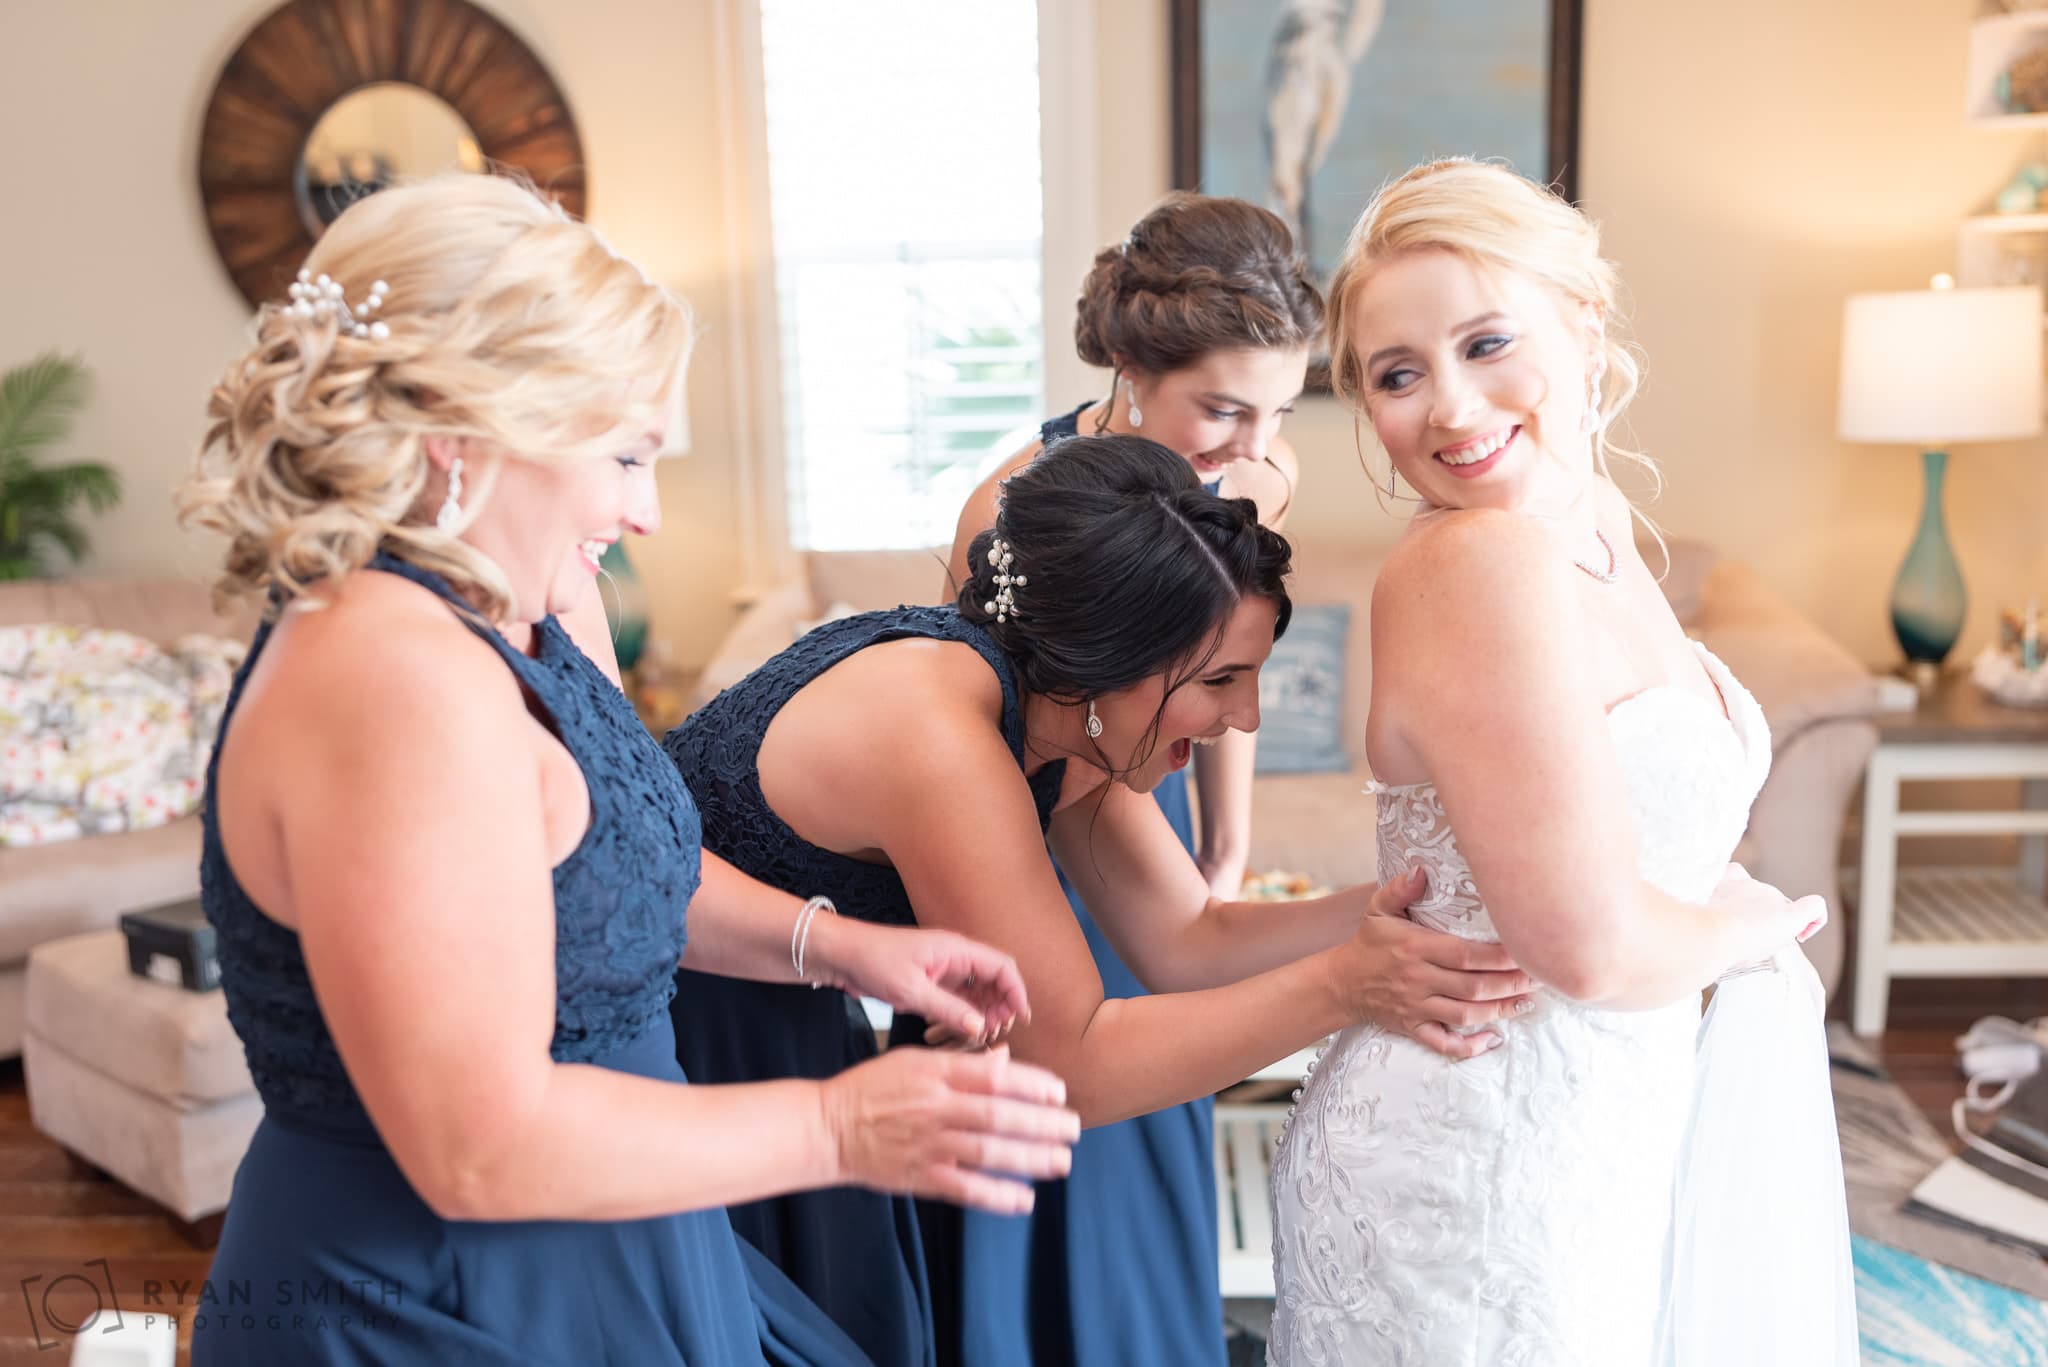 Bridesmaids helping bride with the dress - 21 Main Events - North Myrtle Beach